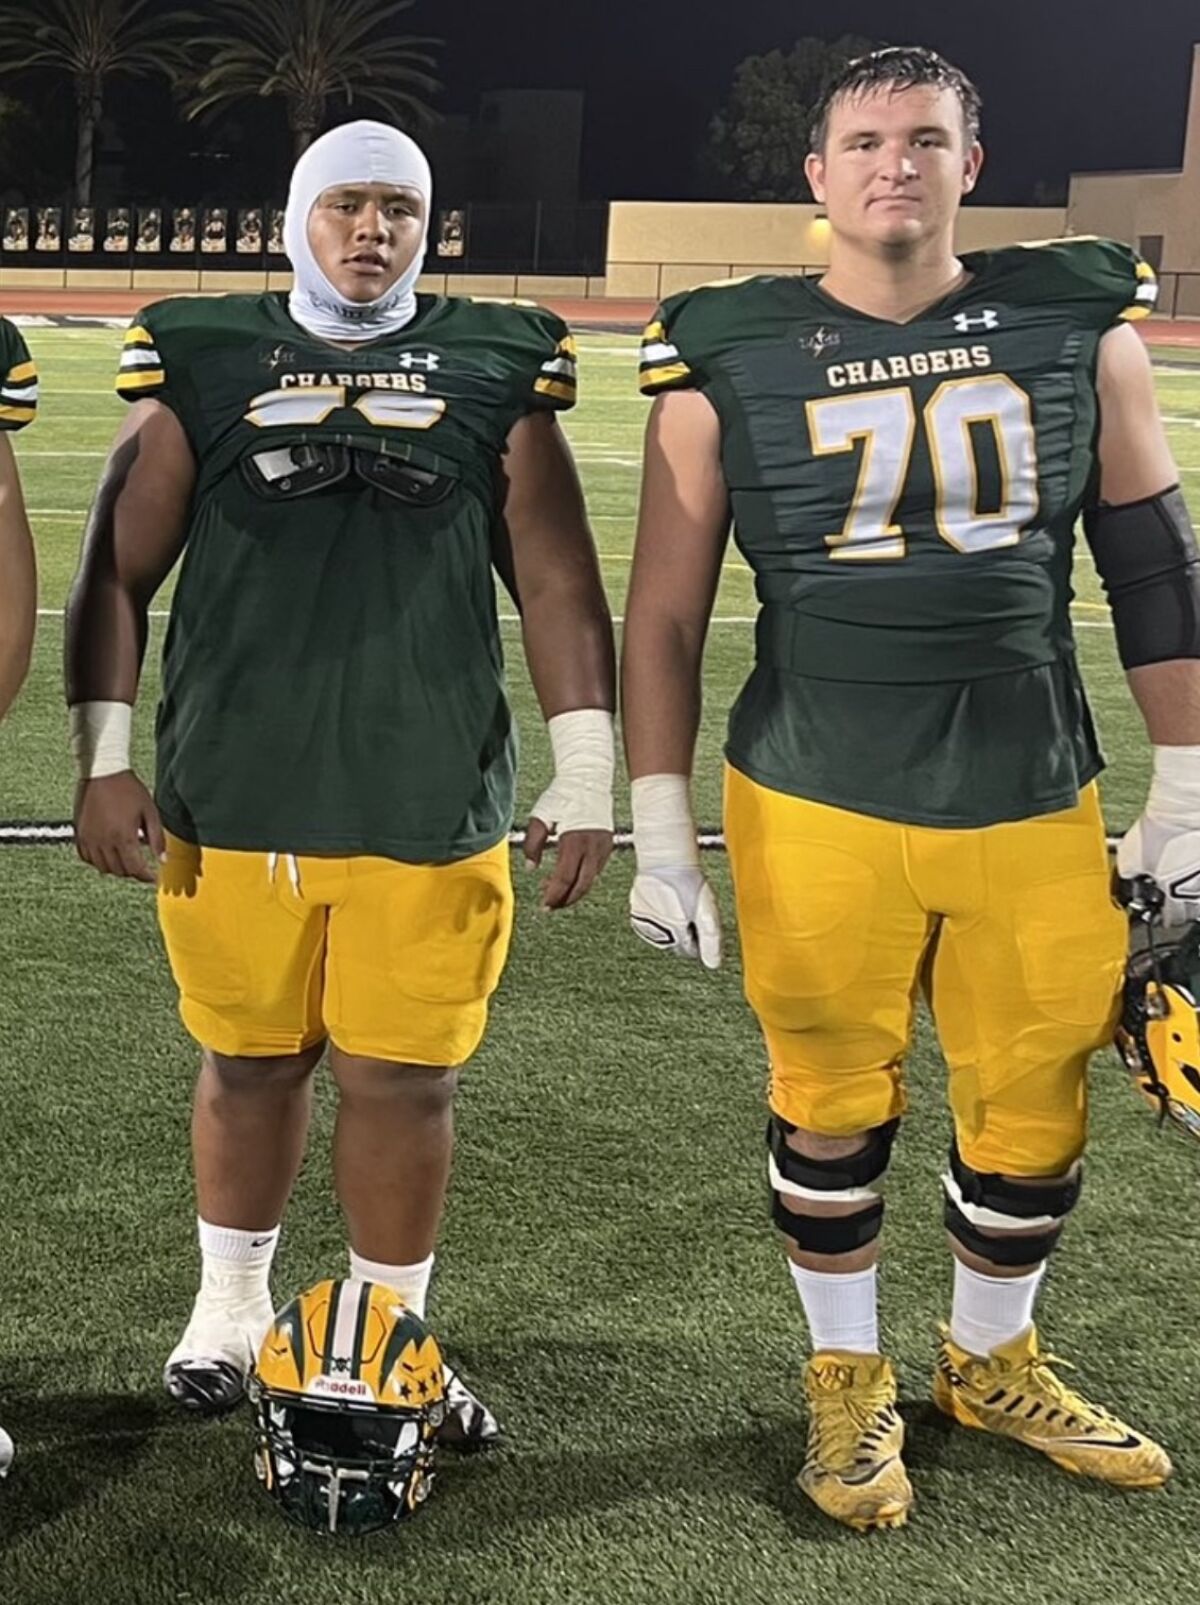 Edison fitters Makai Sagiao, left, and Nathan Gates.